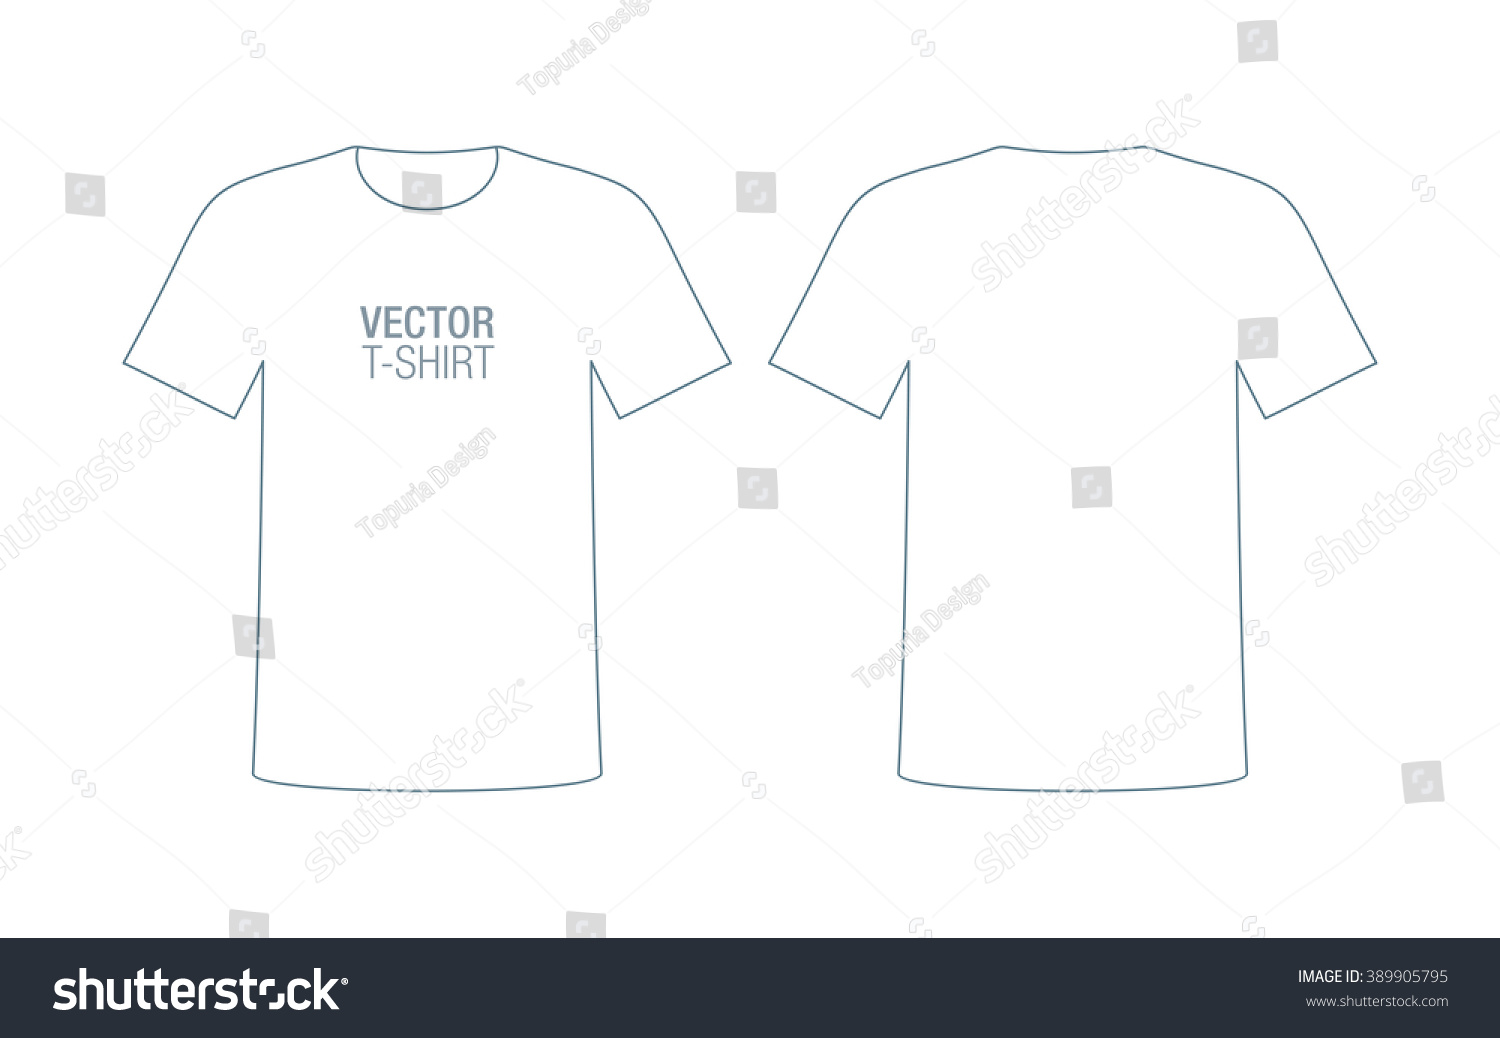 Download Vector Tshirt Silhouette Front Back Sides Stock Vector ...